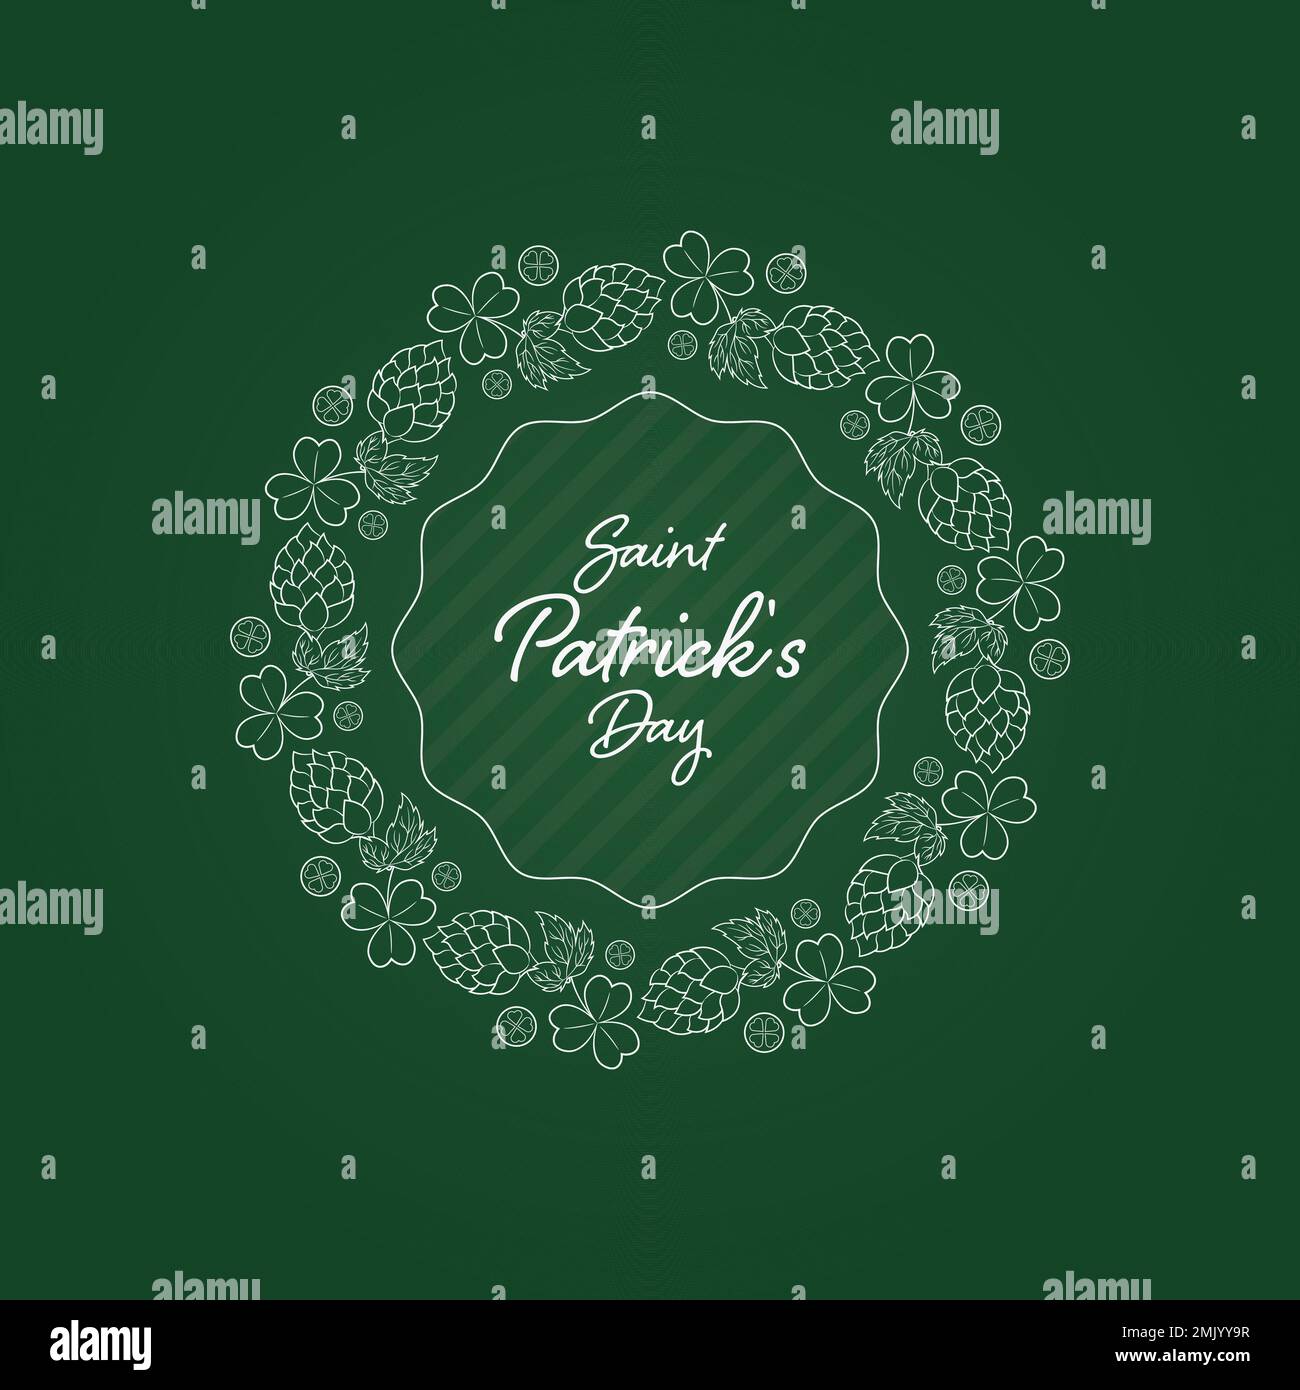 saint patricks day background with hop, shamrock and coins Stock Vector